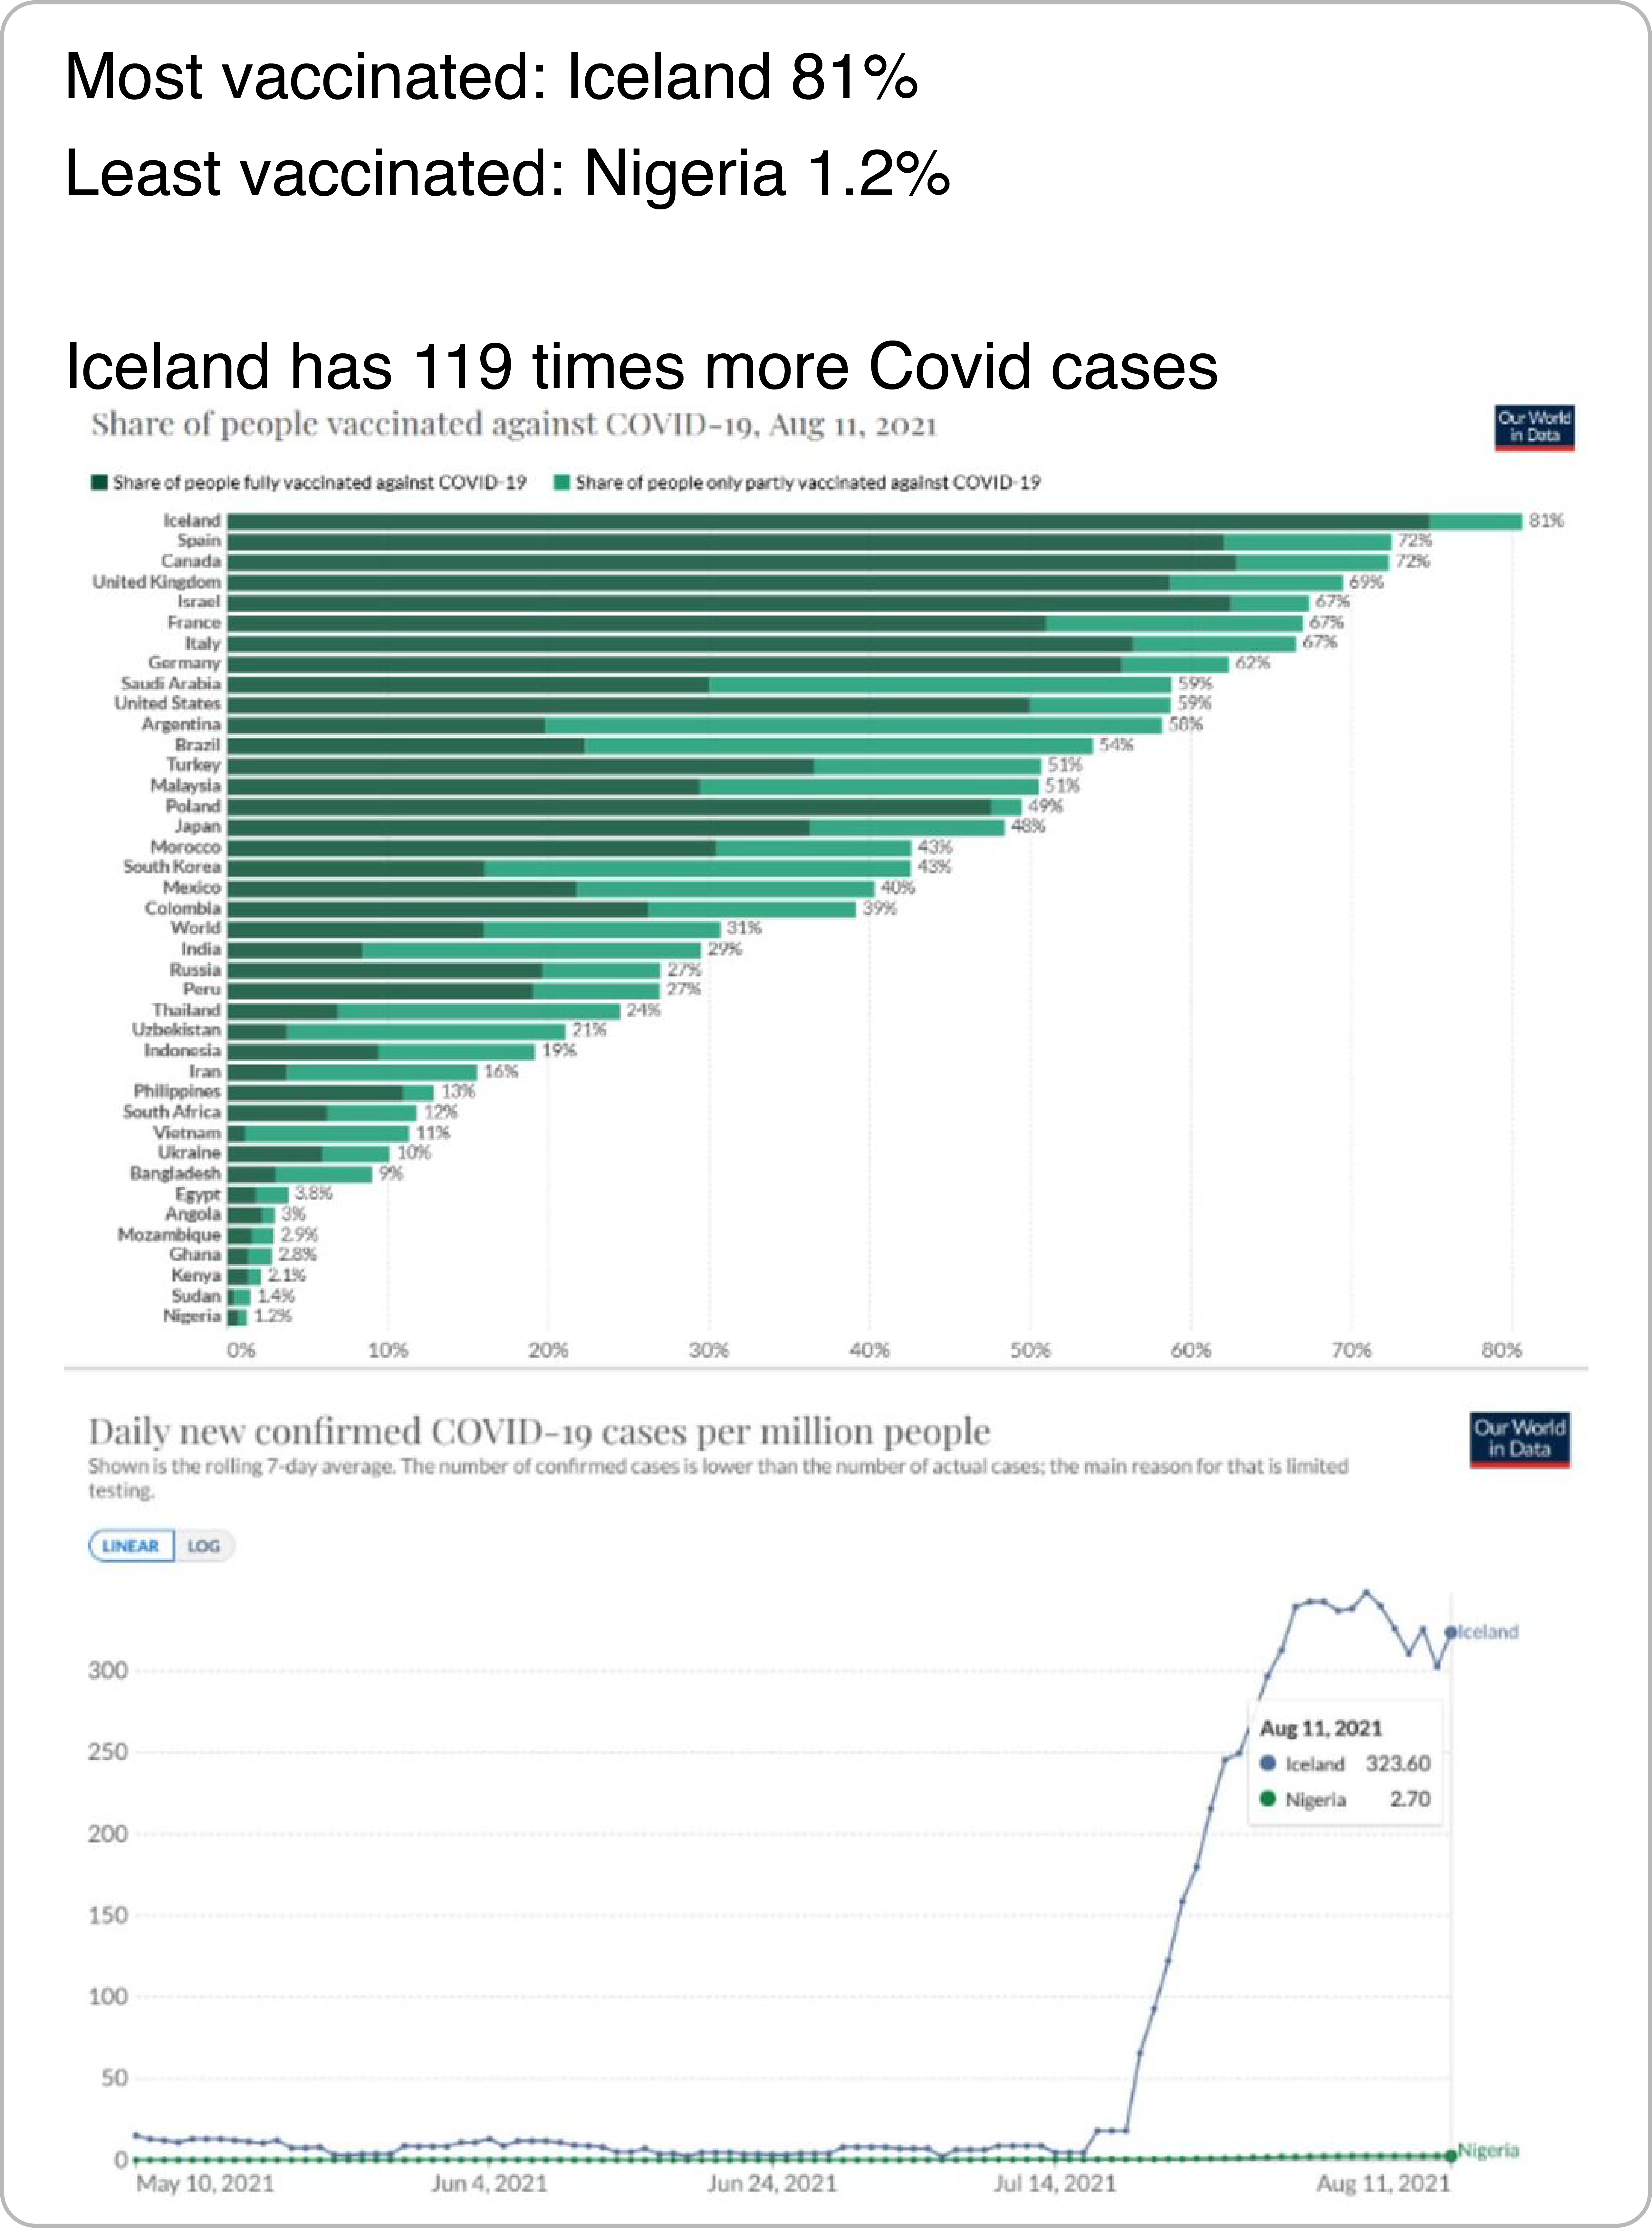 Screenshot of a tweet.  
The caption says: Most vaccinated Iceland 81%, least vaccinated Nigeria 1.2%. Iceland has 119 times more Covid cases. Attached are two charts: A bar chart of shares of people vaccinated by country, where Iceland is on top of the list. The other chart is a line chart of Covid cases in Iceland and Nigeria over time, with Iceland being much higher.
